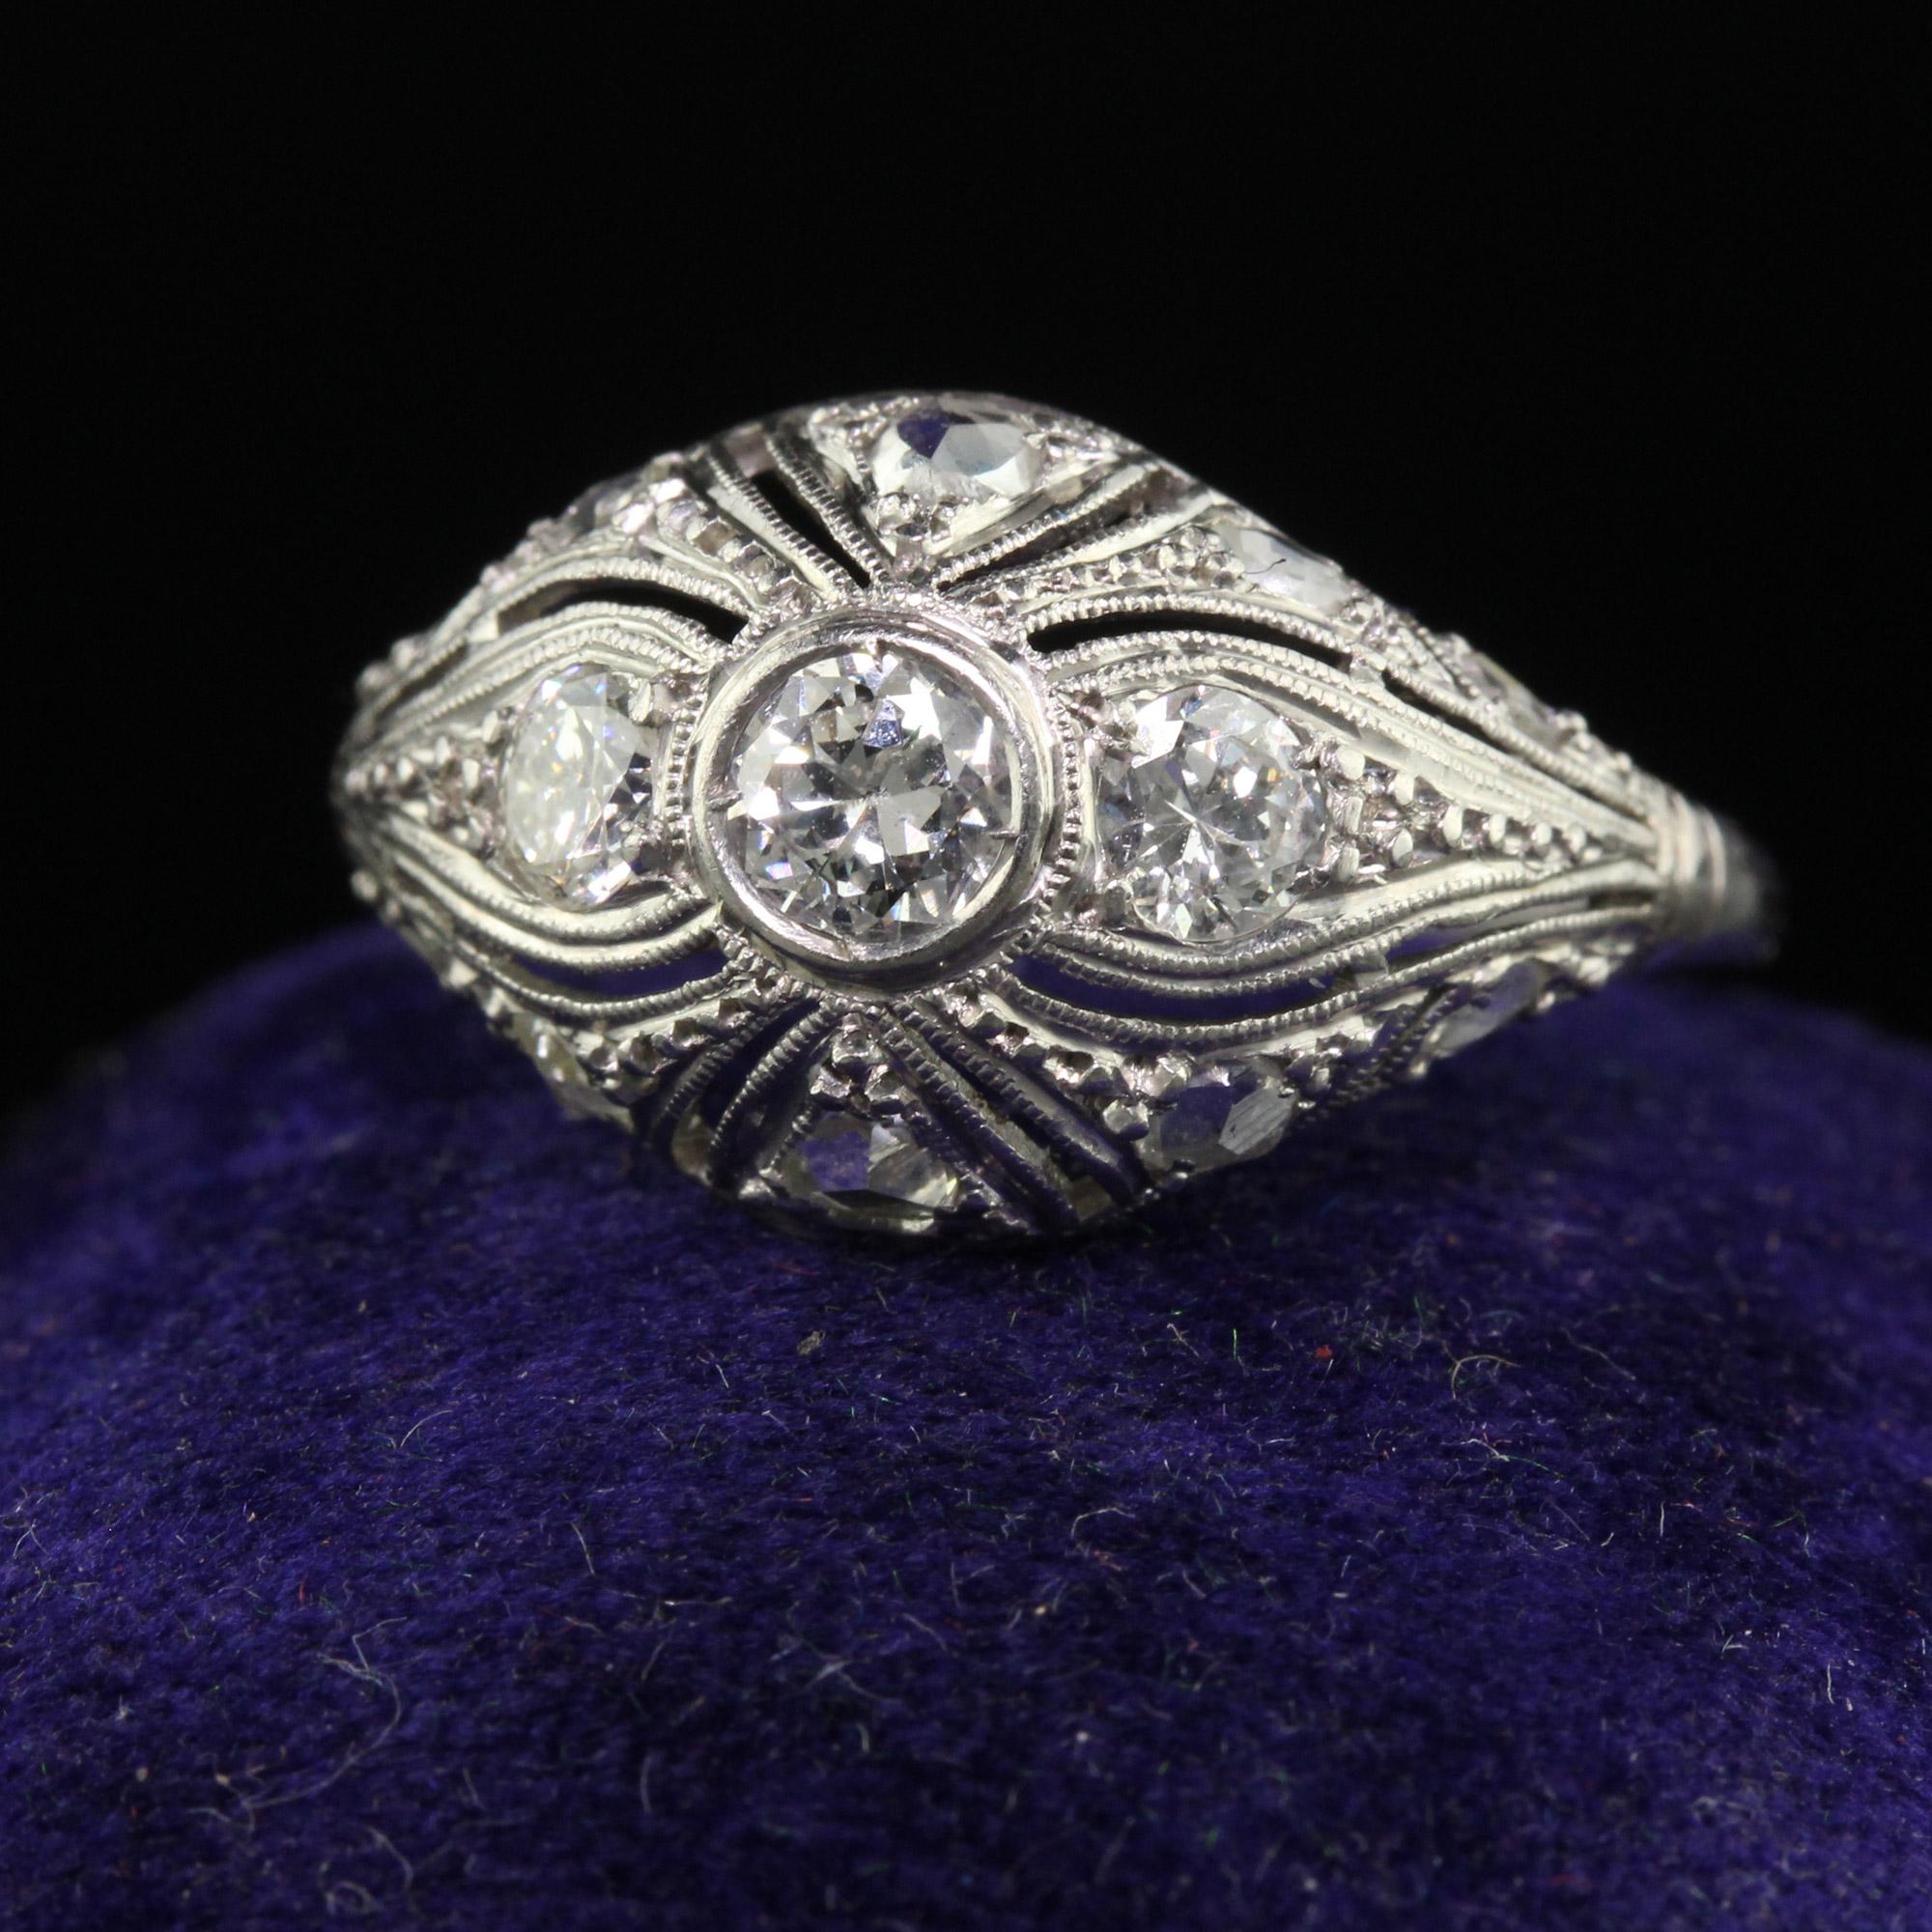 Beautiful Antique Art Deco Platinum Old European Diamond Filigree Engagement Ring. This beautiful engagement ring is crafted in platinum. The center holds three old European cut diamonds on the top with surrounding rose cut diamonds. The ring is in